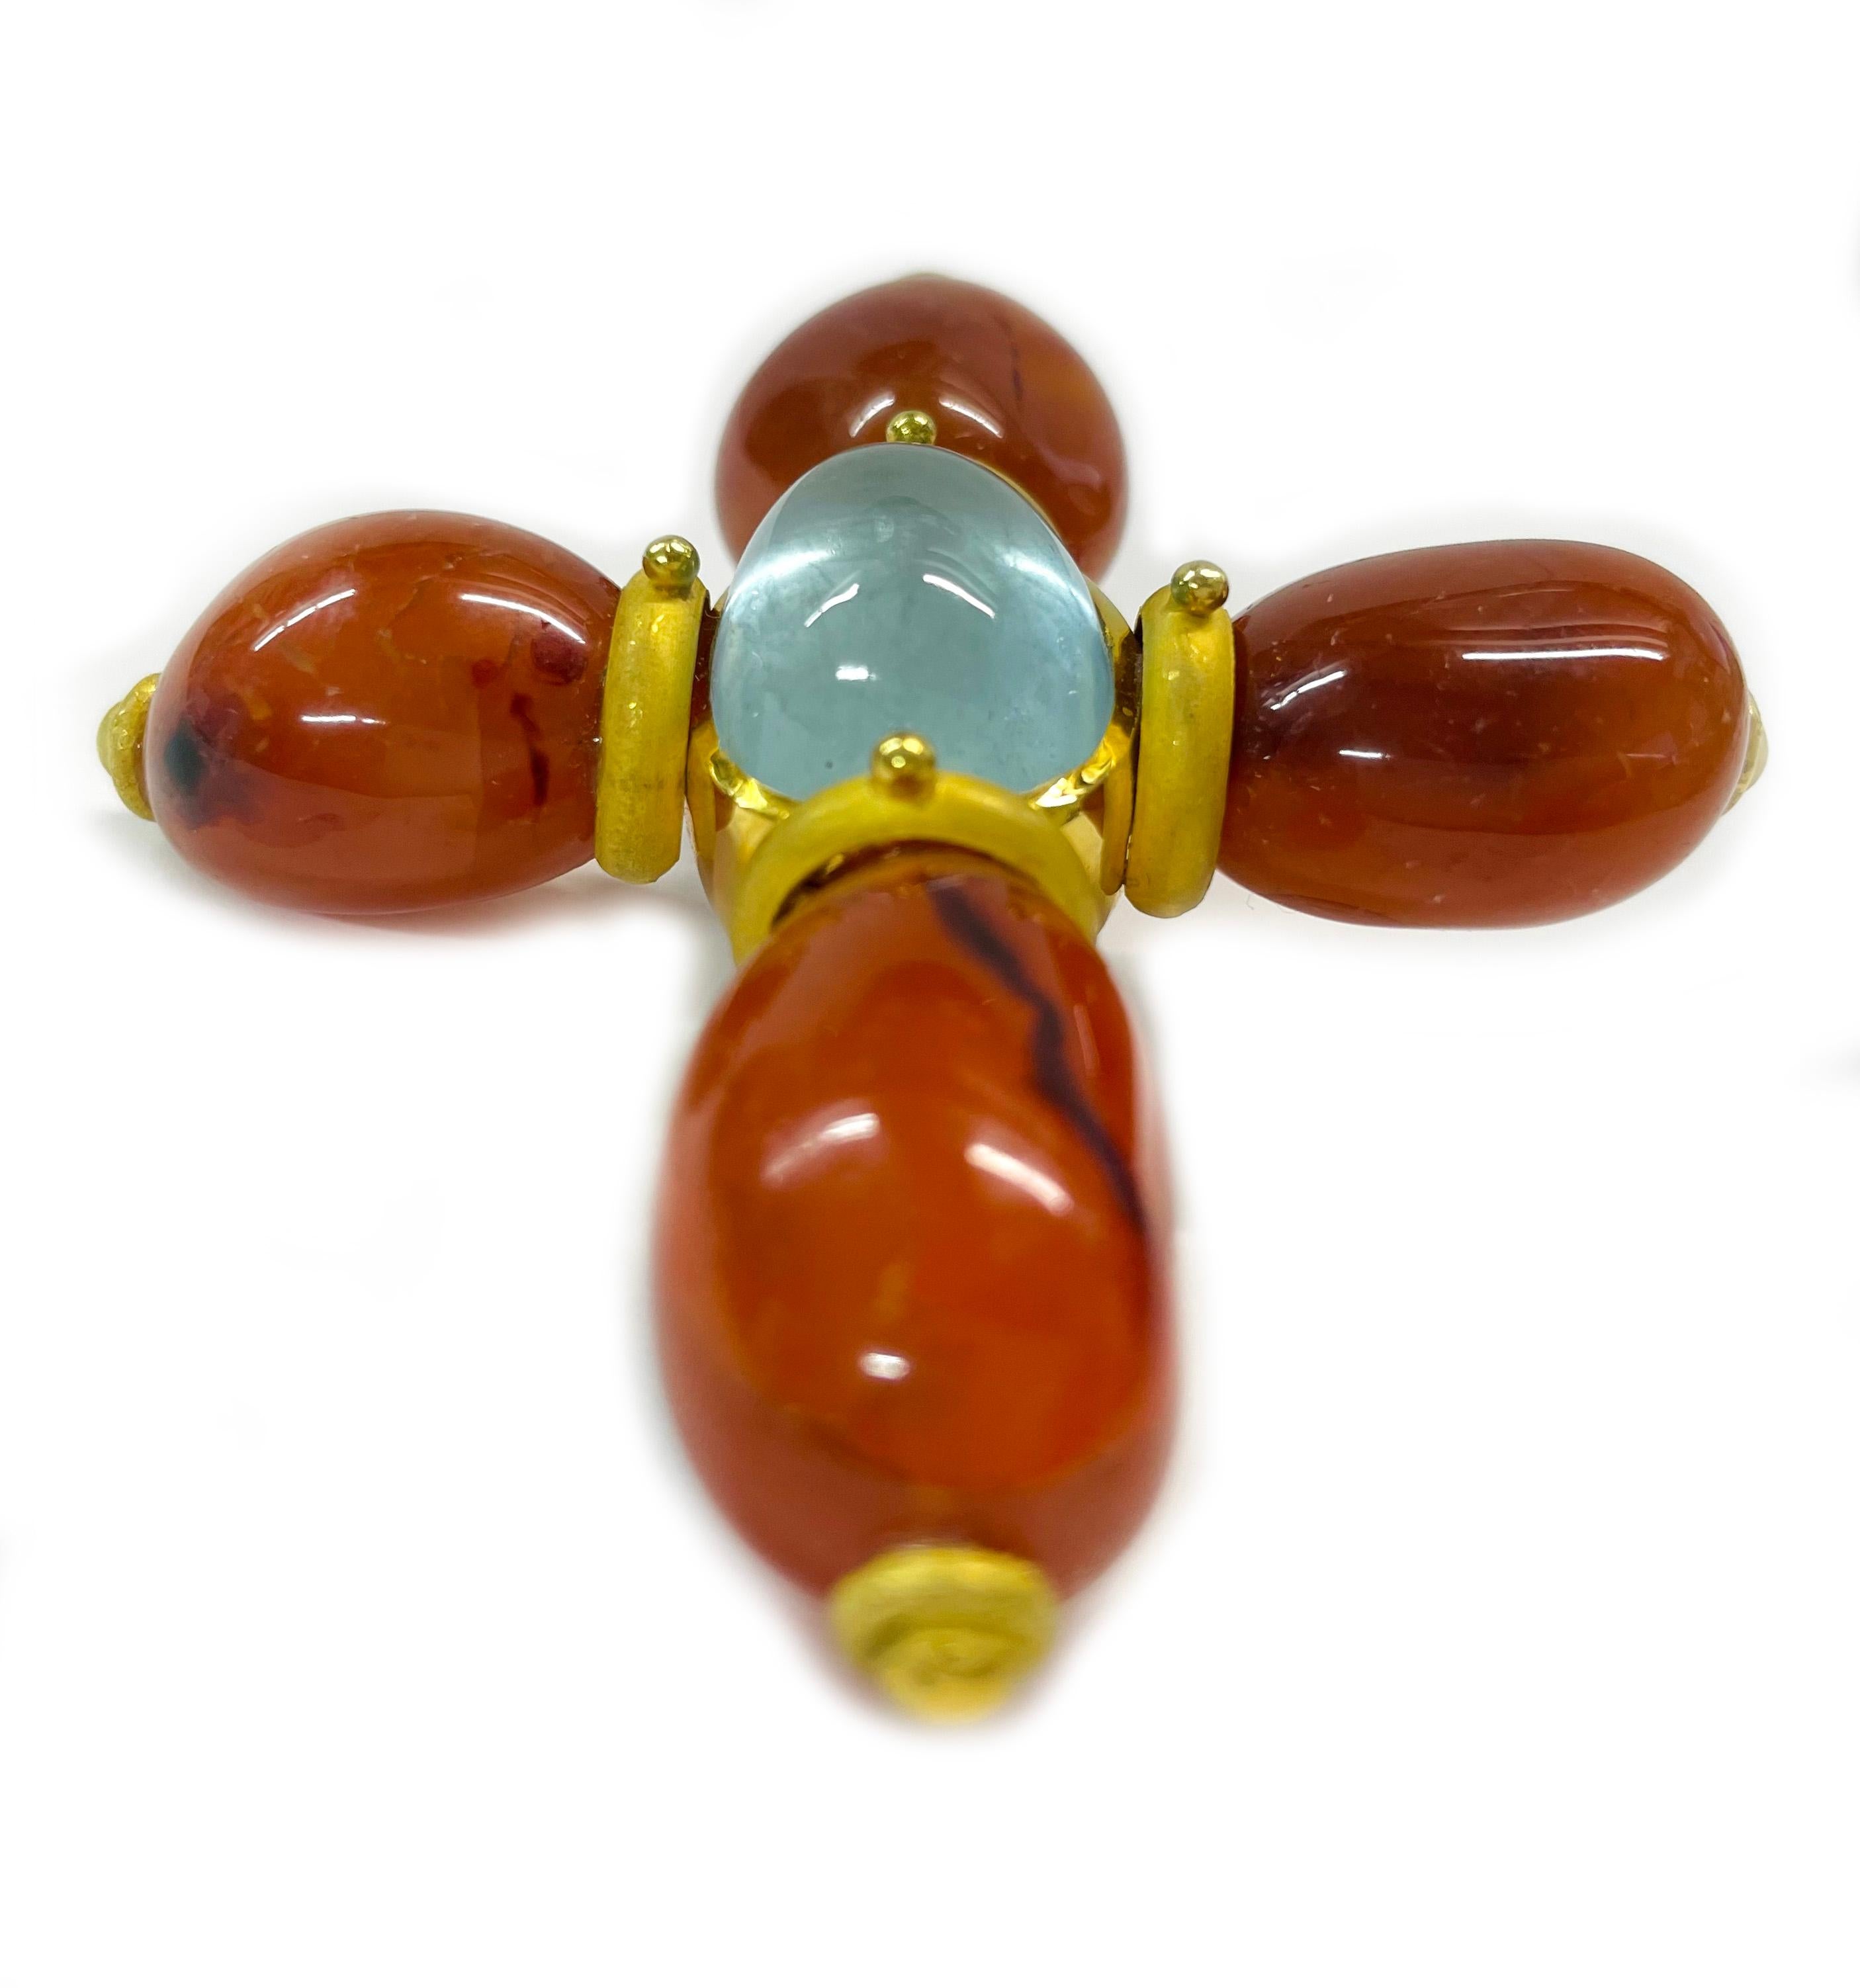 18K Yellow Gold Carnelian Aquamarine Cross Pendant. The pendant features four organic shaped polished Carnelian stones and an oval-shaped aquamarine set in an open bezel at the center forming a cross shape. This is a substantial sized pendant with